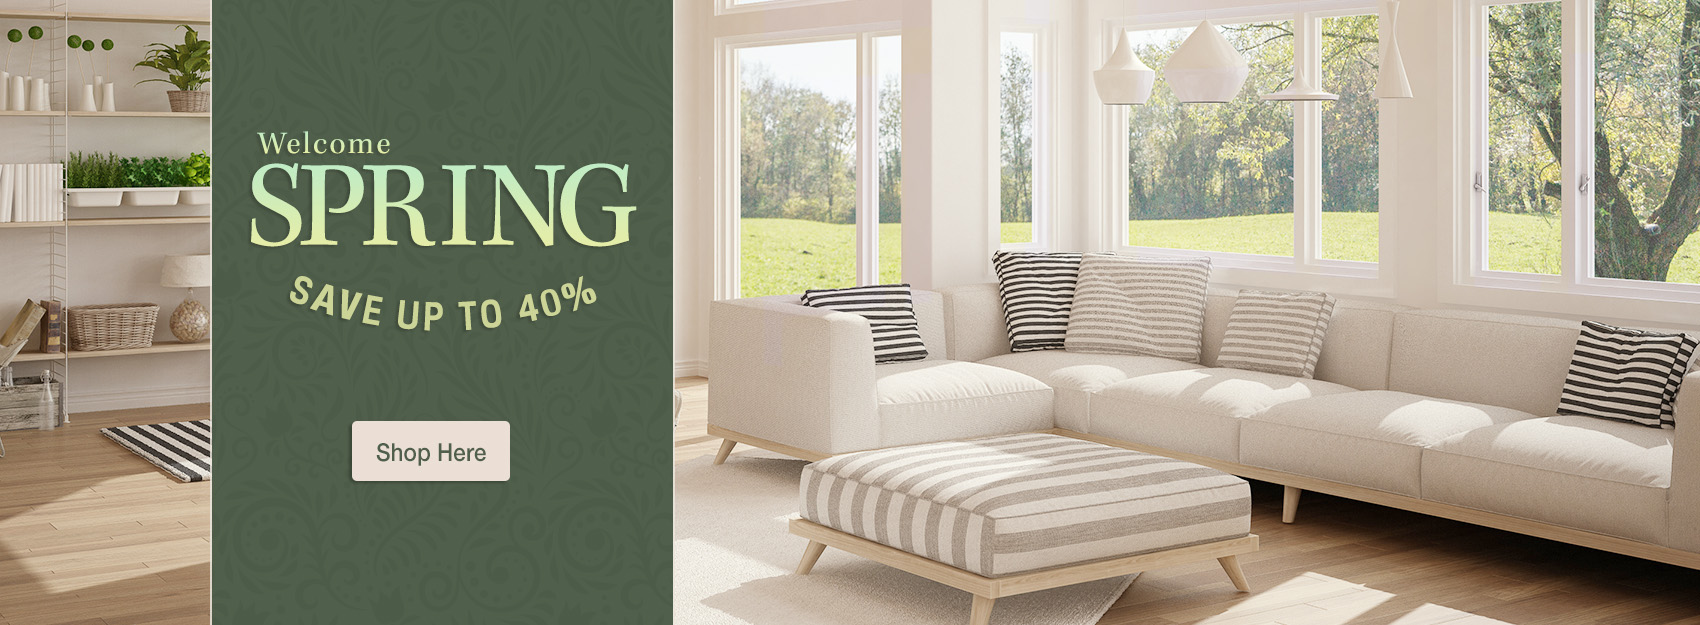 Save up to 40% as part of the Spring Sales Event.